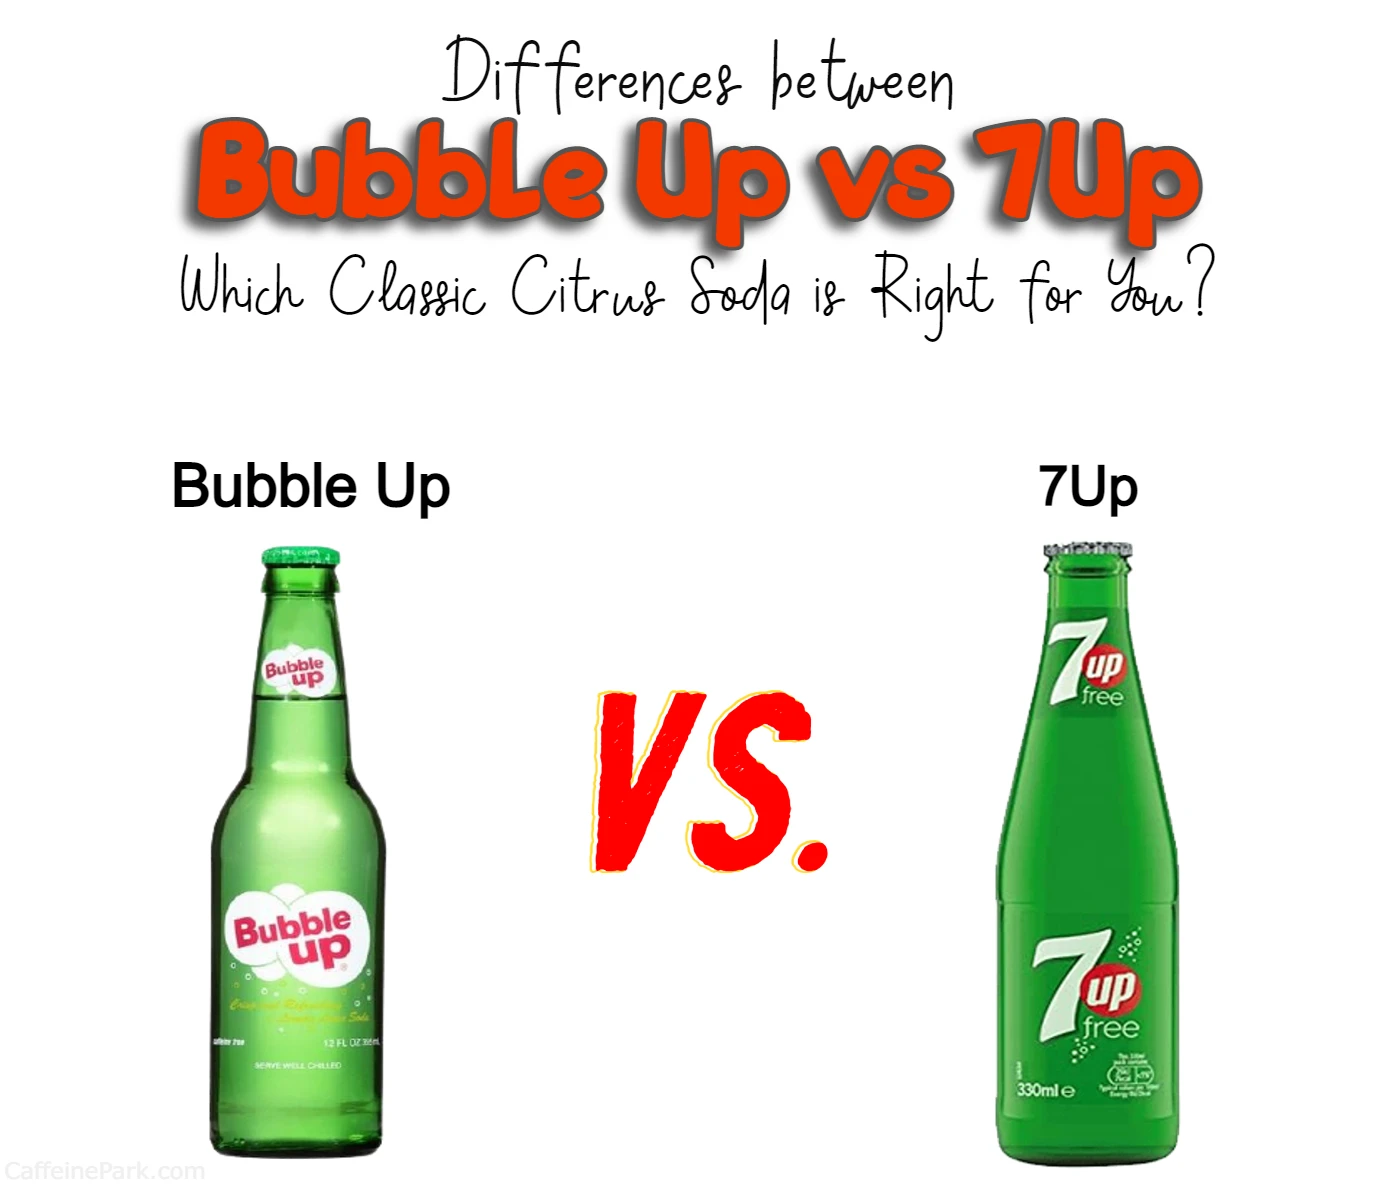 differences between Bubble Up and Up